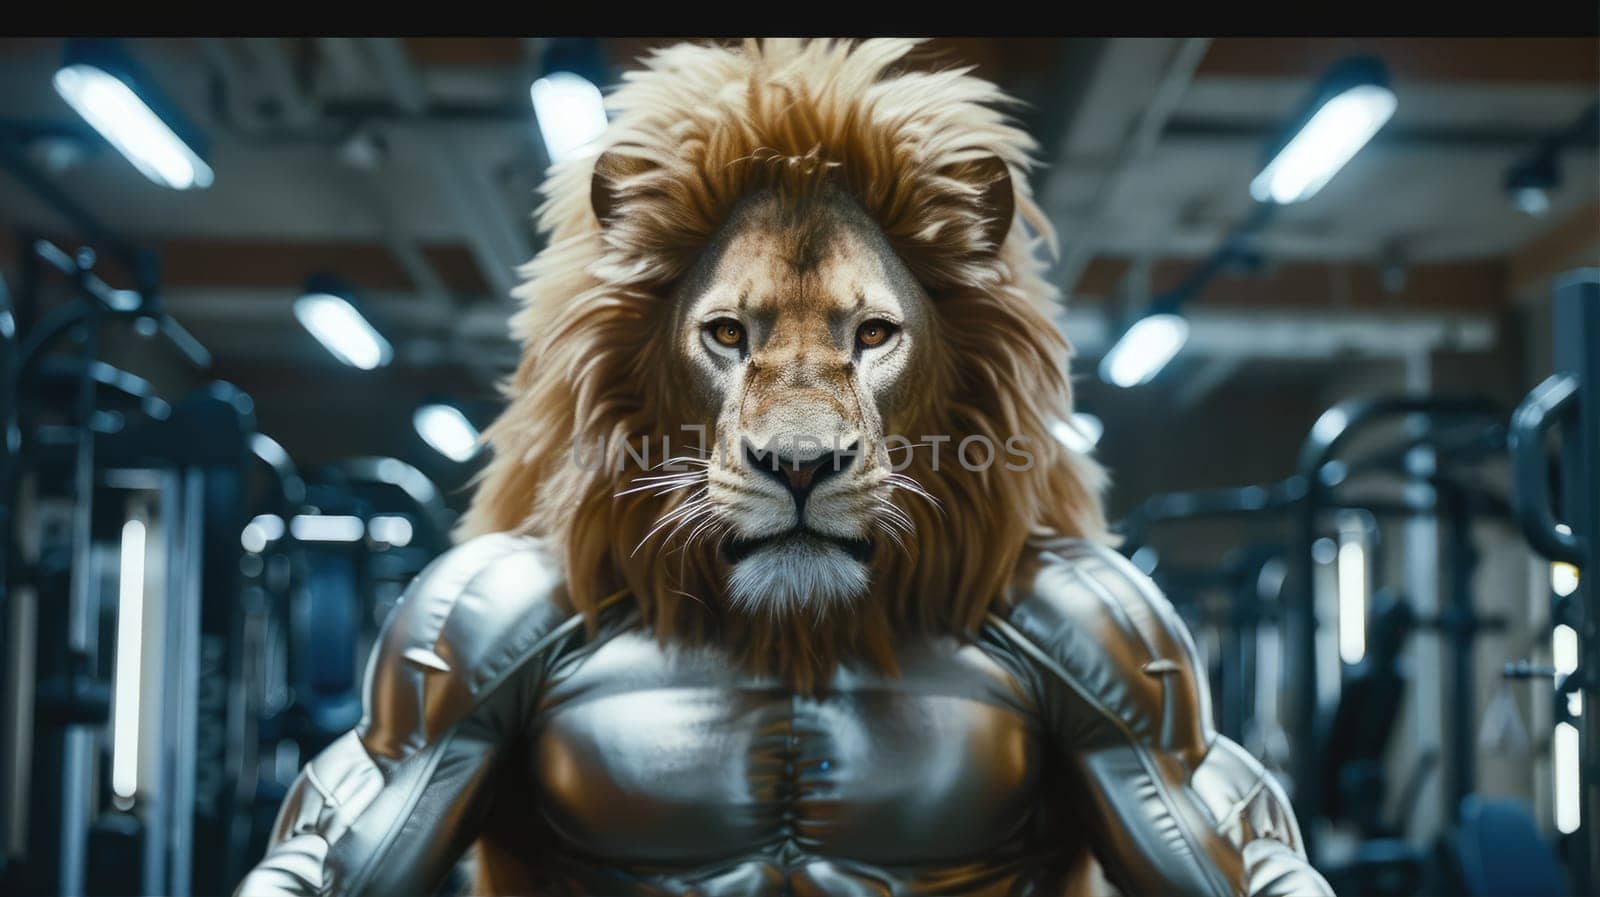 A muscular lion is standing in a gym surrounded by metal equipment AI